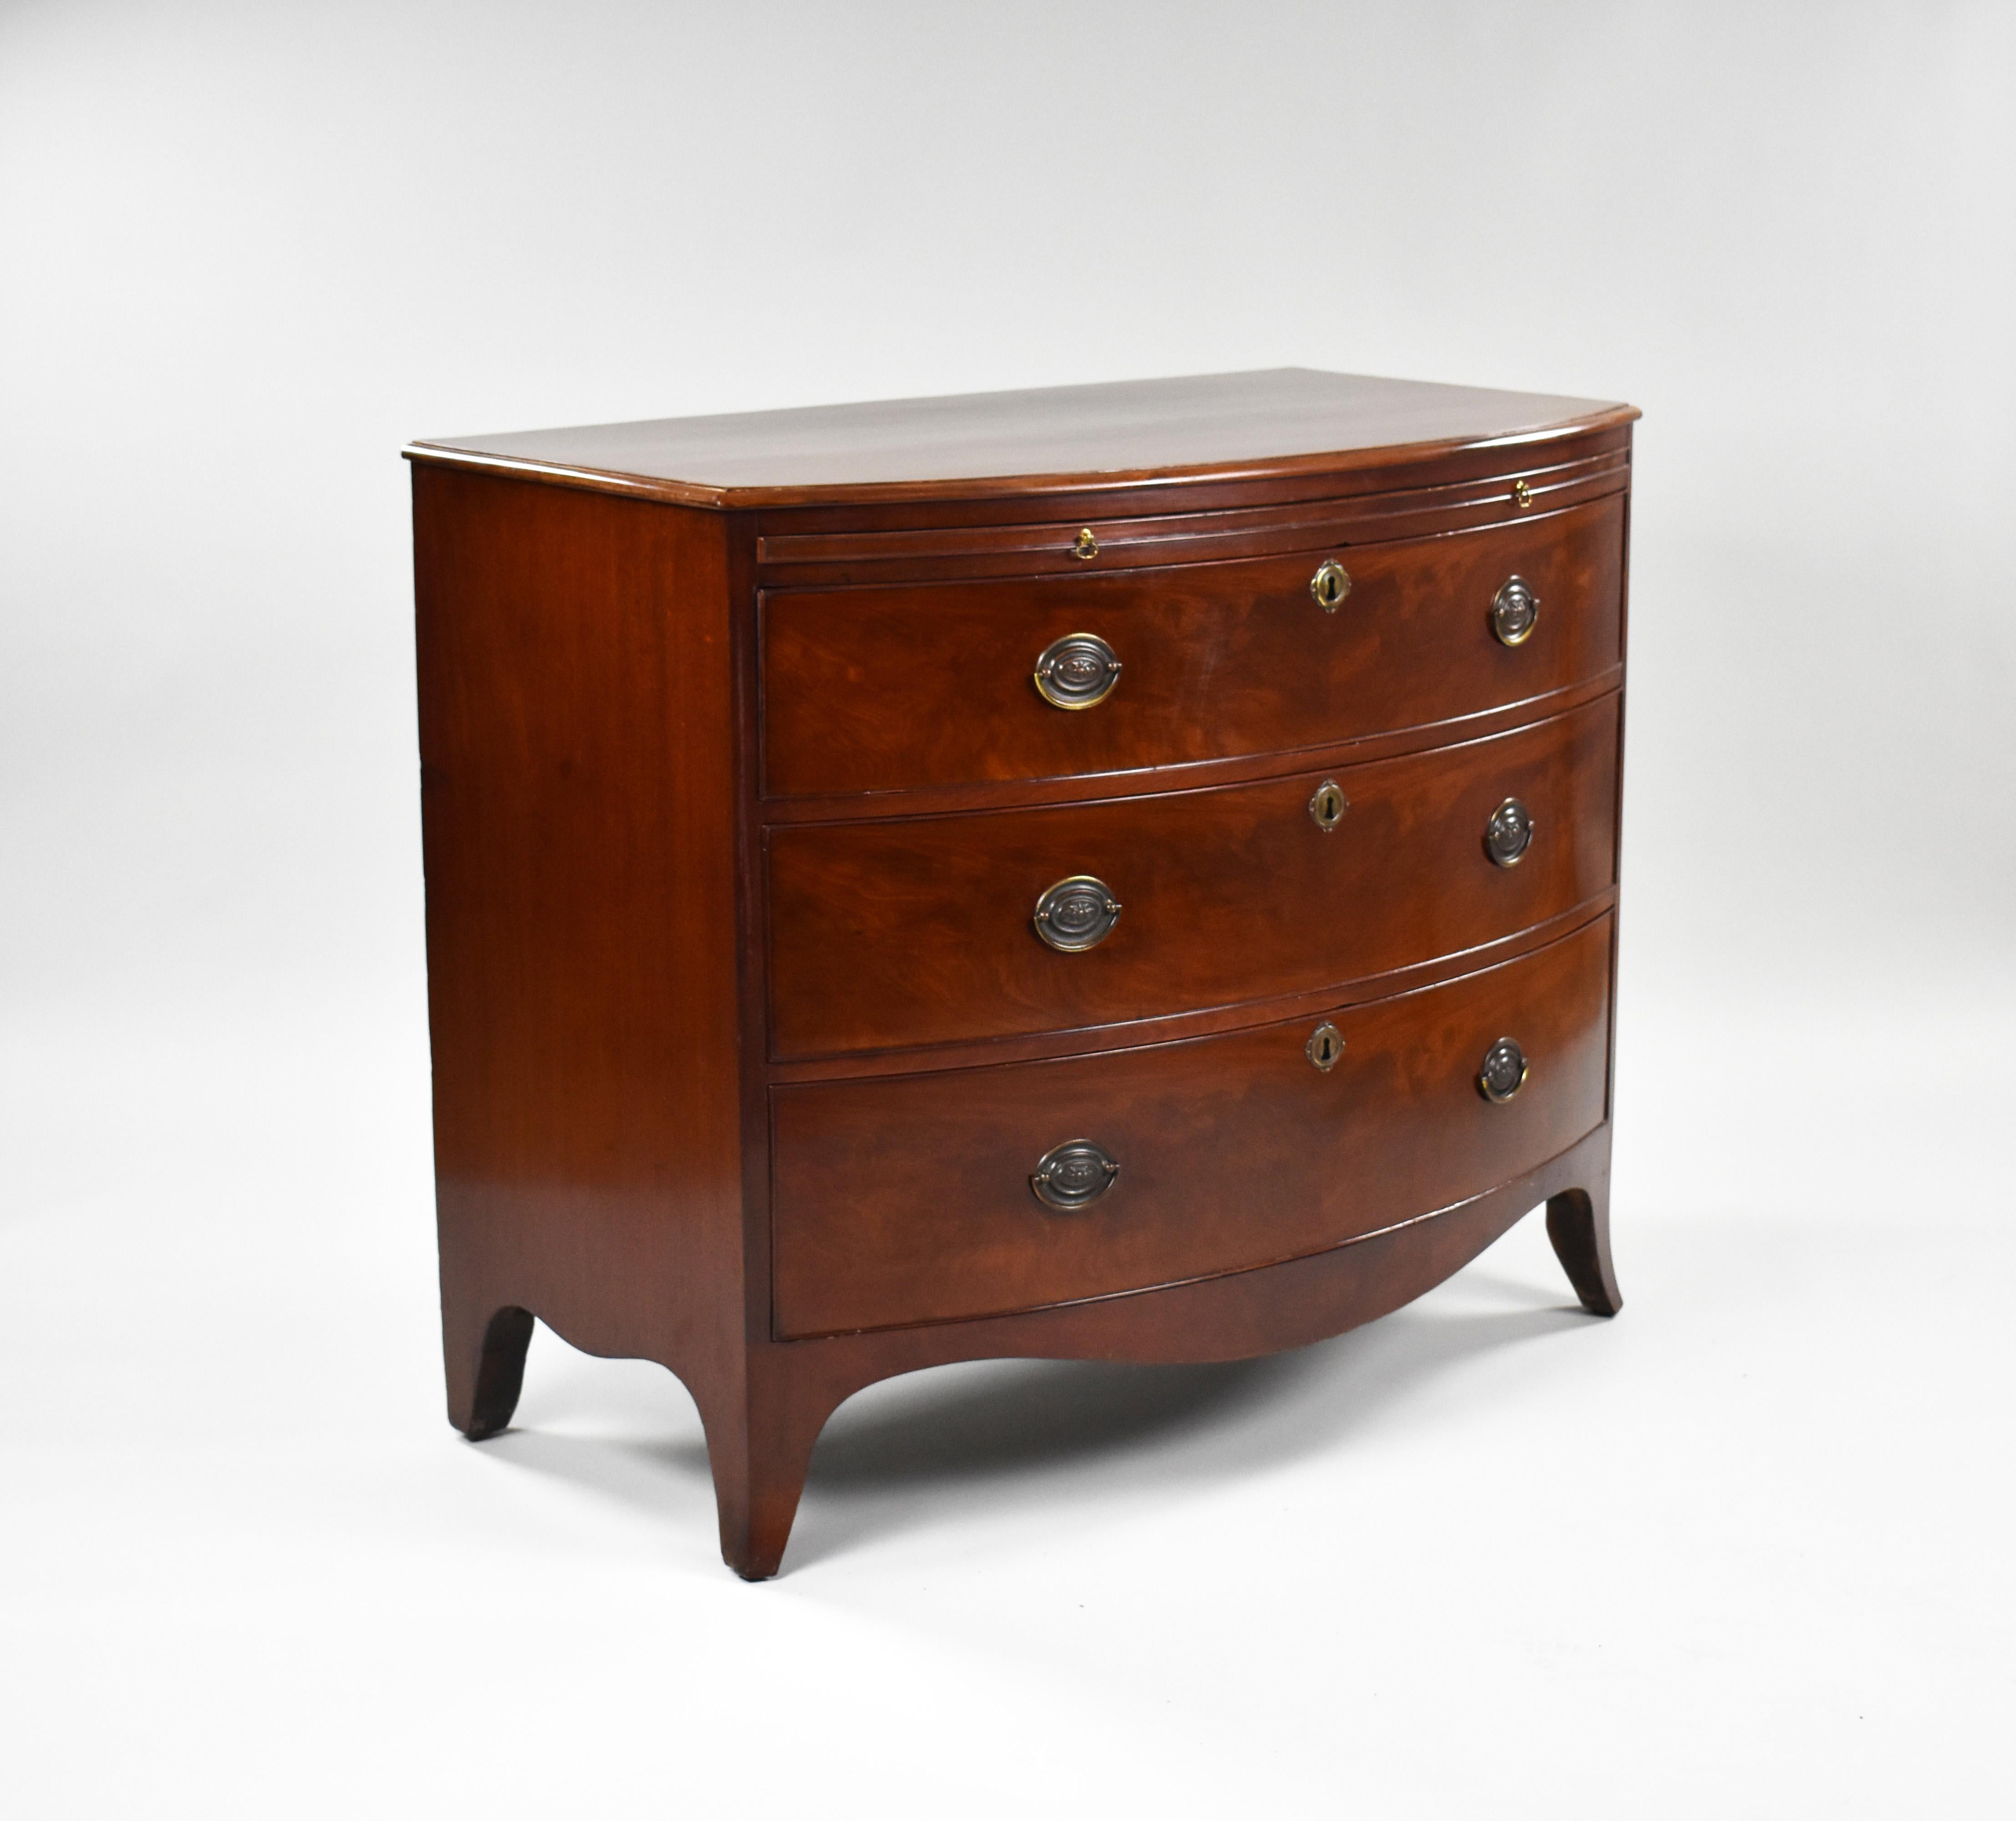 For sale is a good quality Regency mahogany bow front chest of drawers. Having a brushing slide over three long drawers, each with brass handles. The chest stands on splayed feet and is in very good condition for its age. 

Measures: Width: 109cm